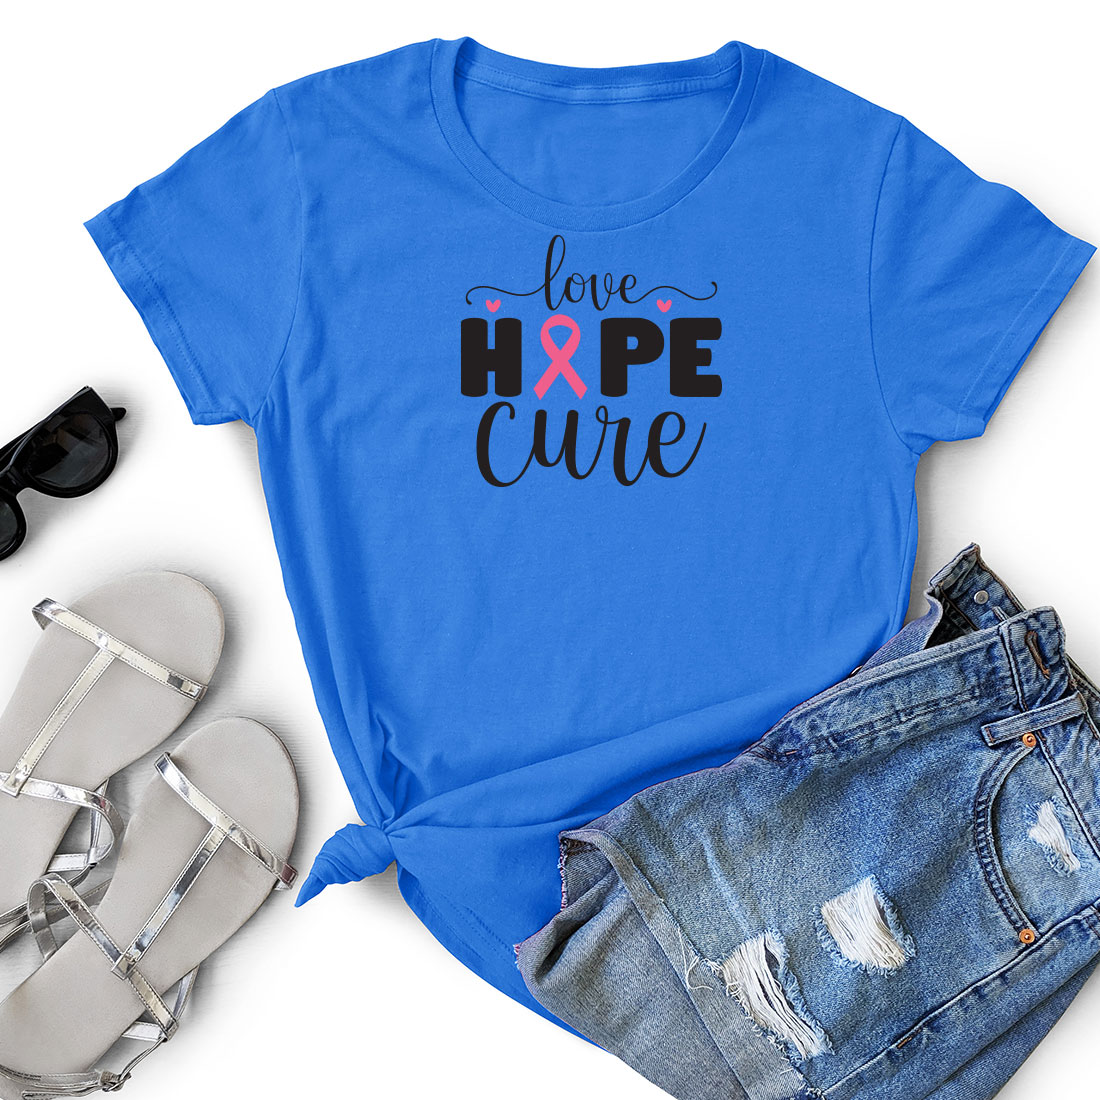 T - shirt that says love hope and a pair of shorts.